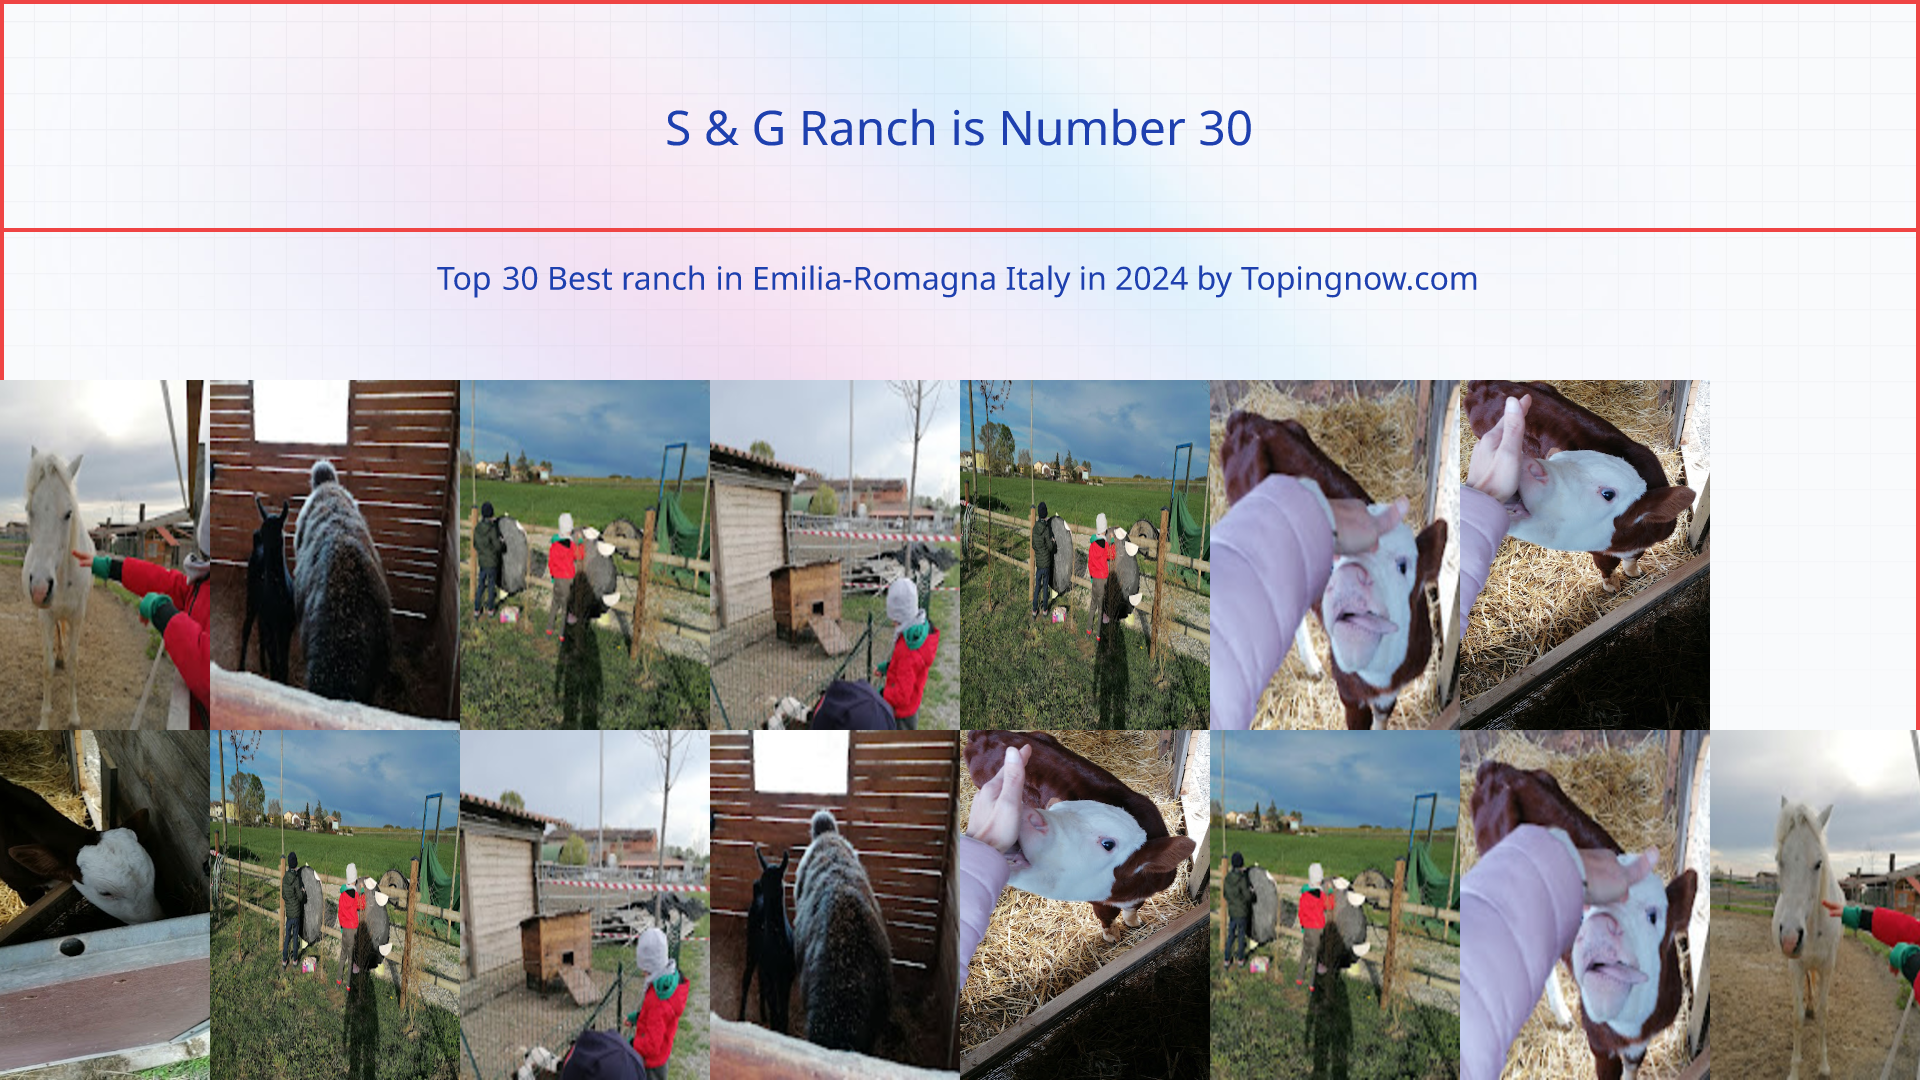 S & G Ranch: Top 30 Best ranch in Emilia-Romagna Italy in 2024